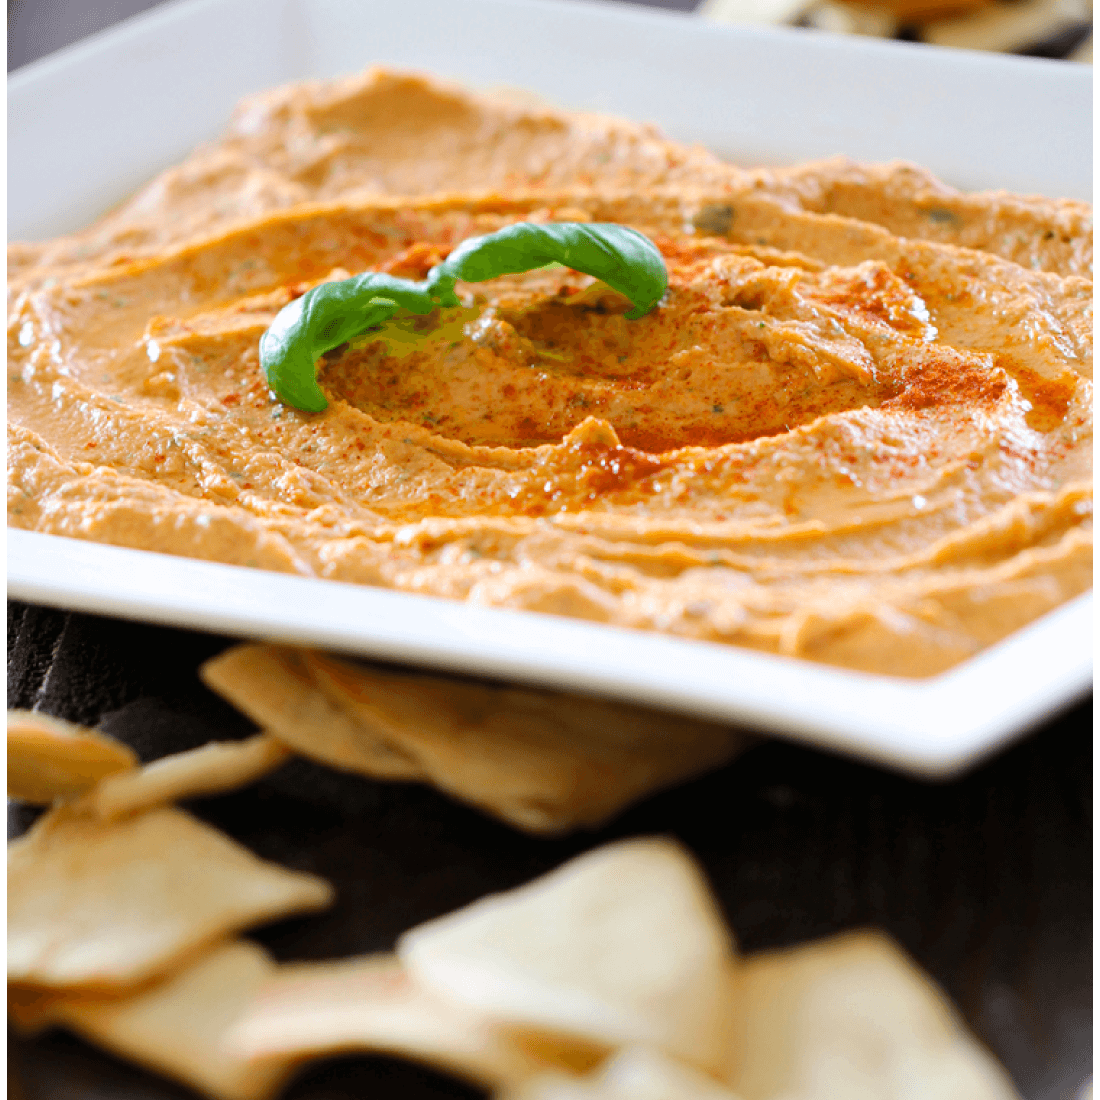 Appetizer Recipes - a round up of the very best. Featuring sun dried tomato hummus